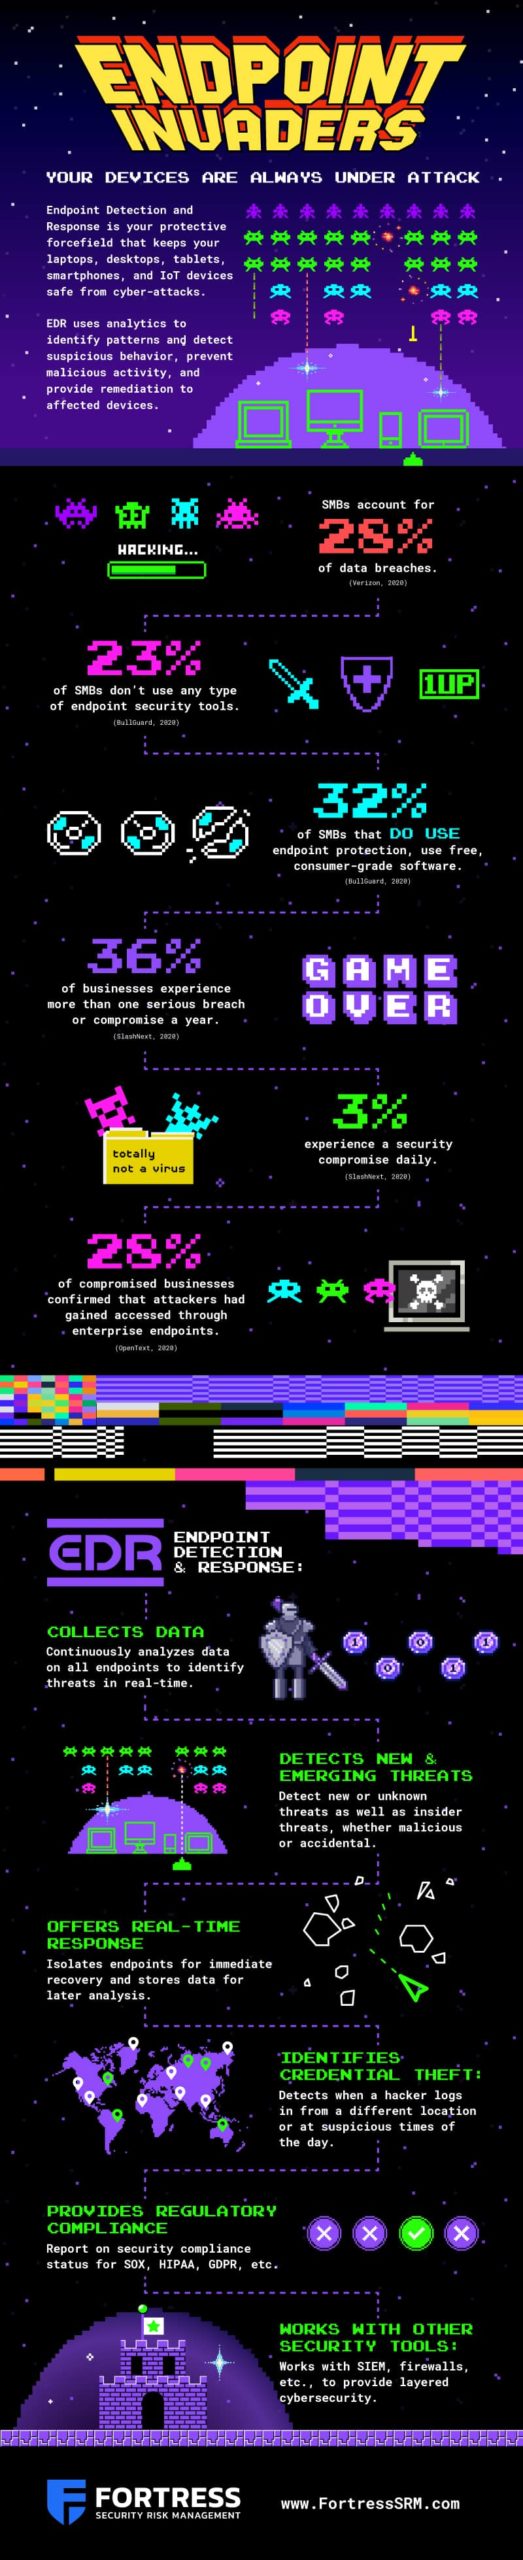 Endpoint Invaders Infographic